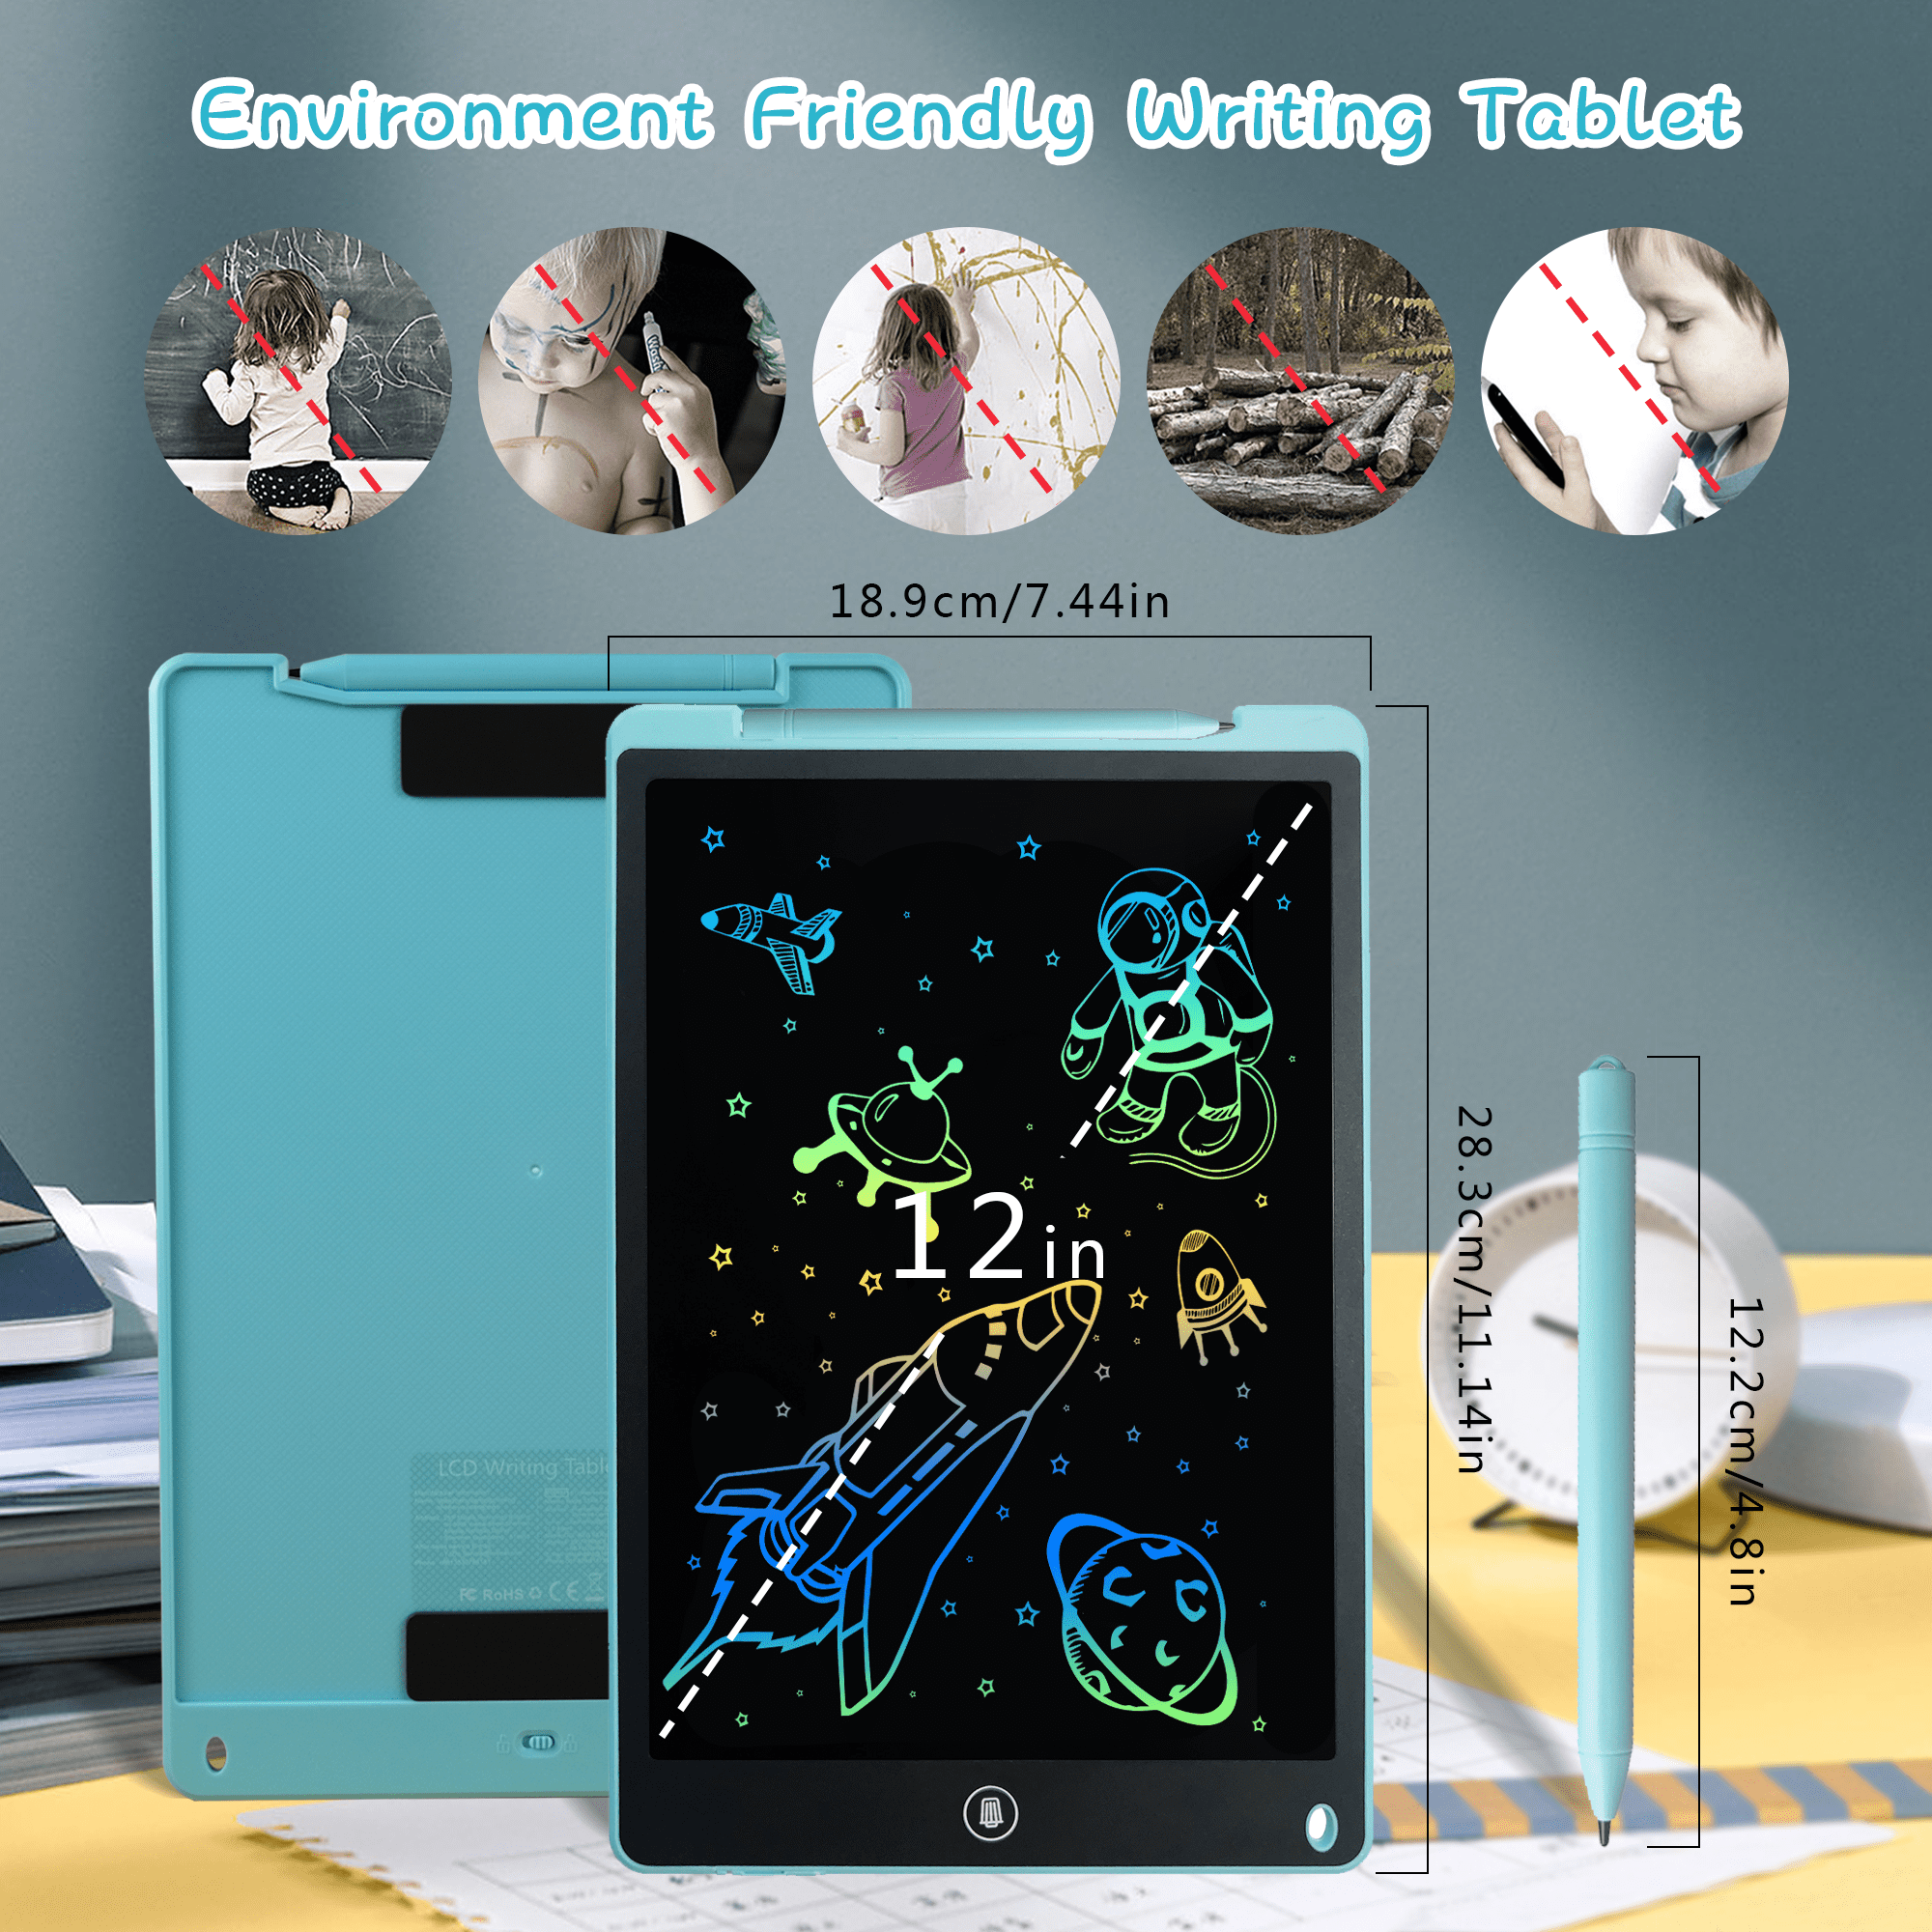 12 LCD drawing tablet for kids – Ludikid